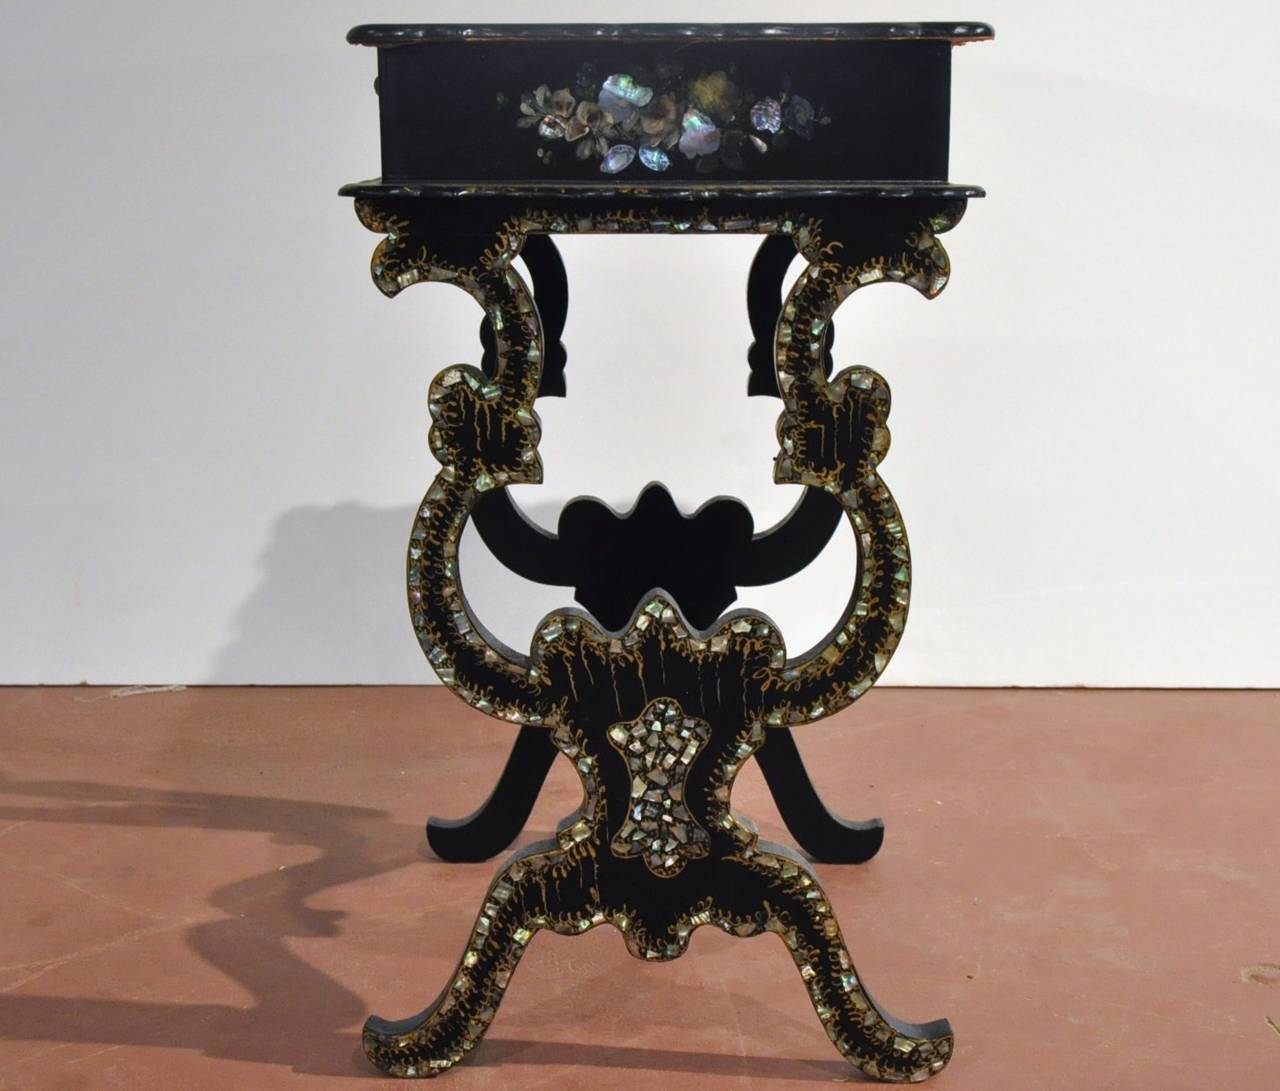 Mother-of-Pearl 19th Century French Lacquered Gilt and Mother of Pearl Chairs and Table Set